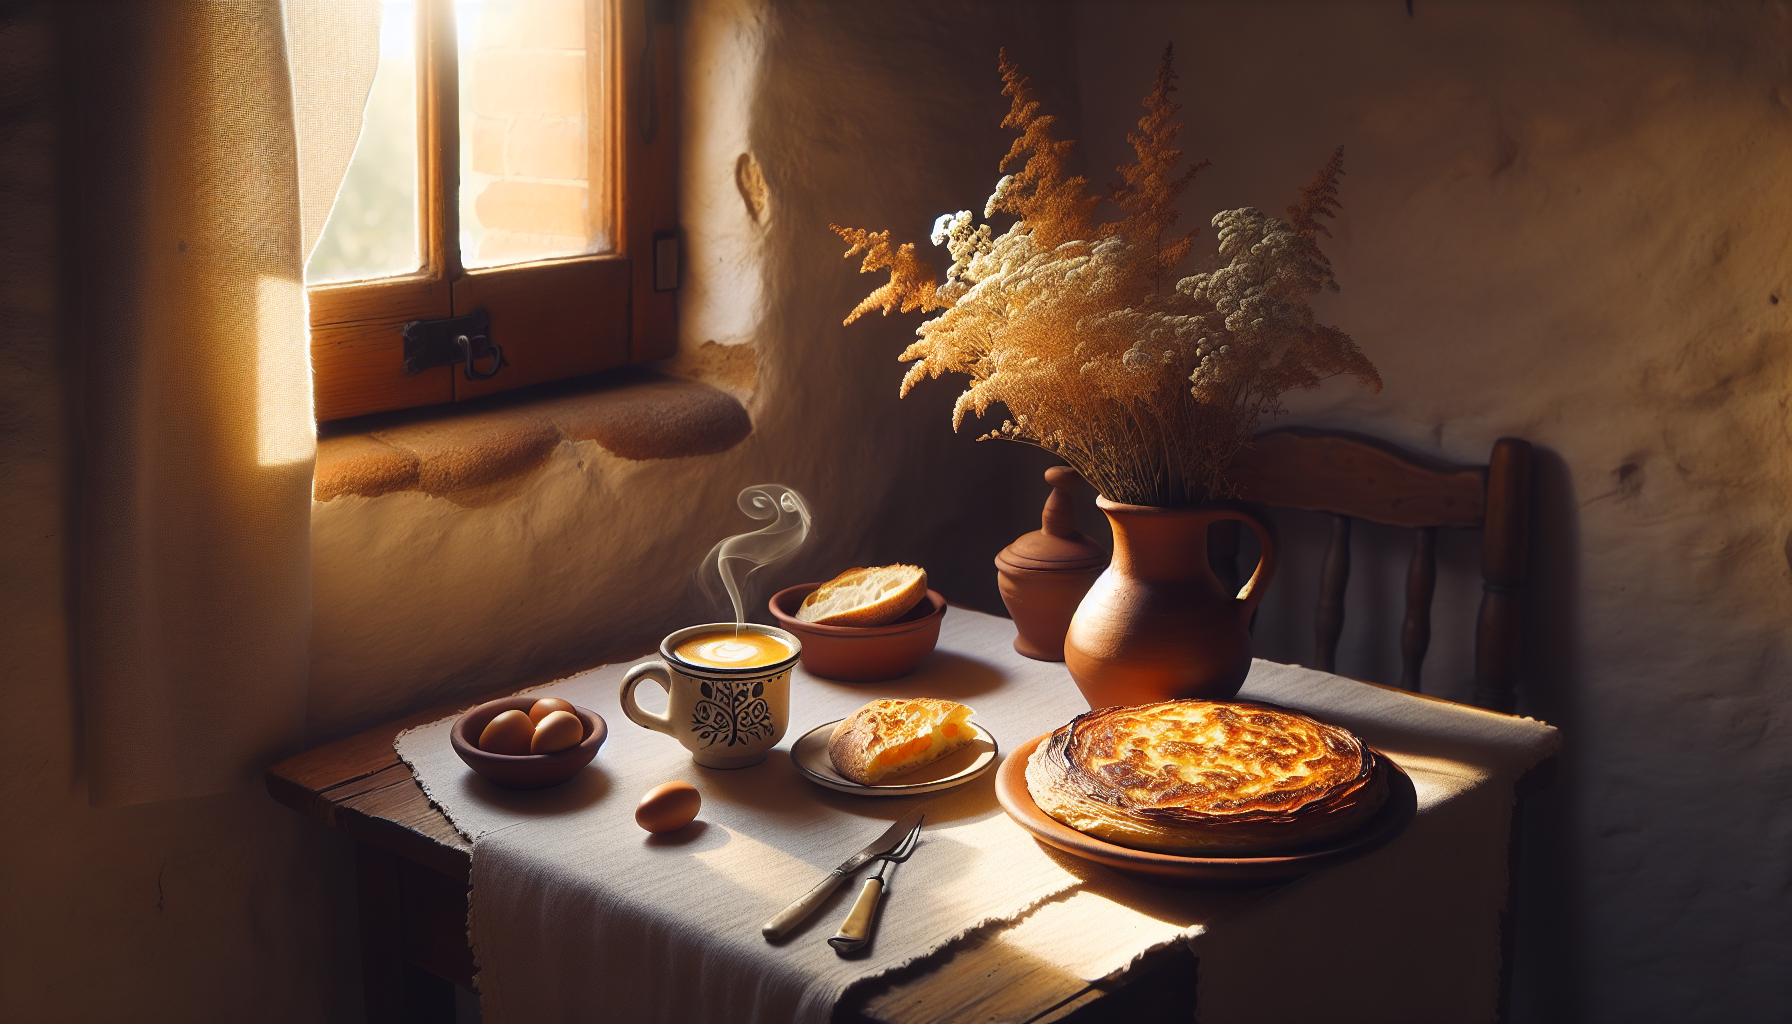 Can You Suggest A Comforting Spanish Breakfast Recipe For A Leisurely Morning?